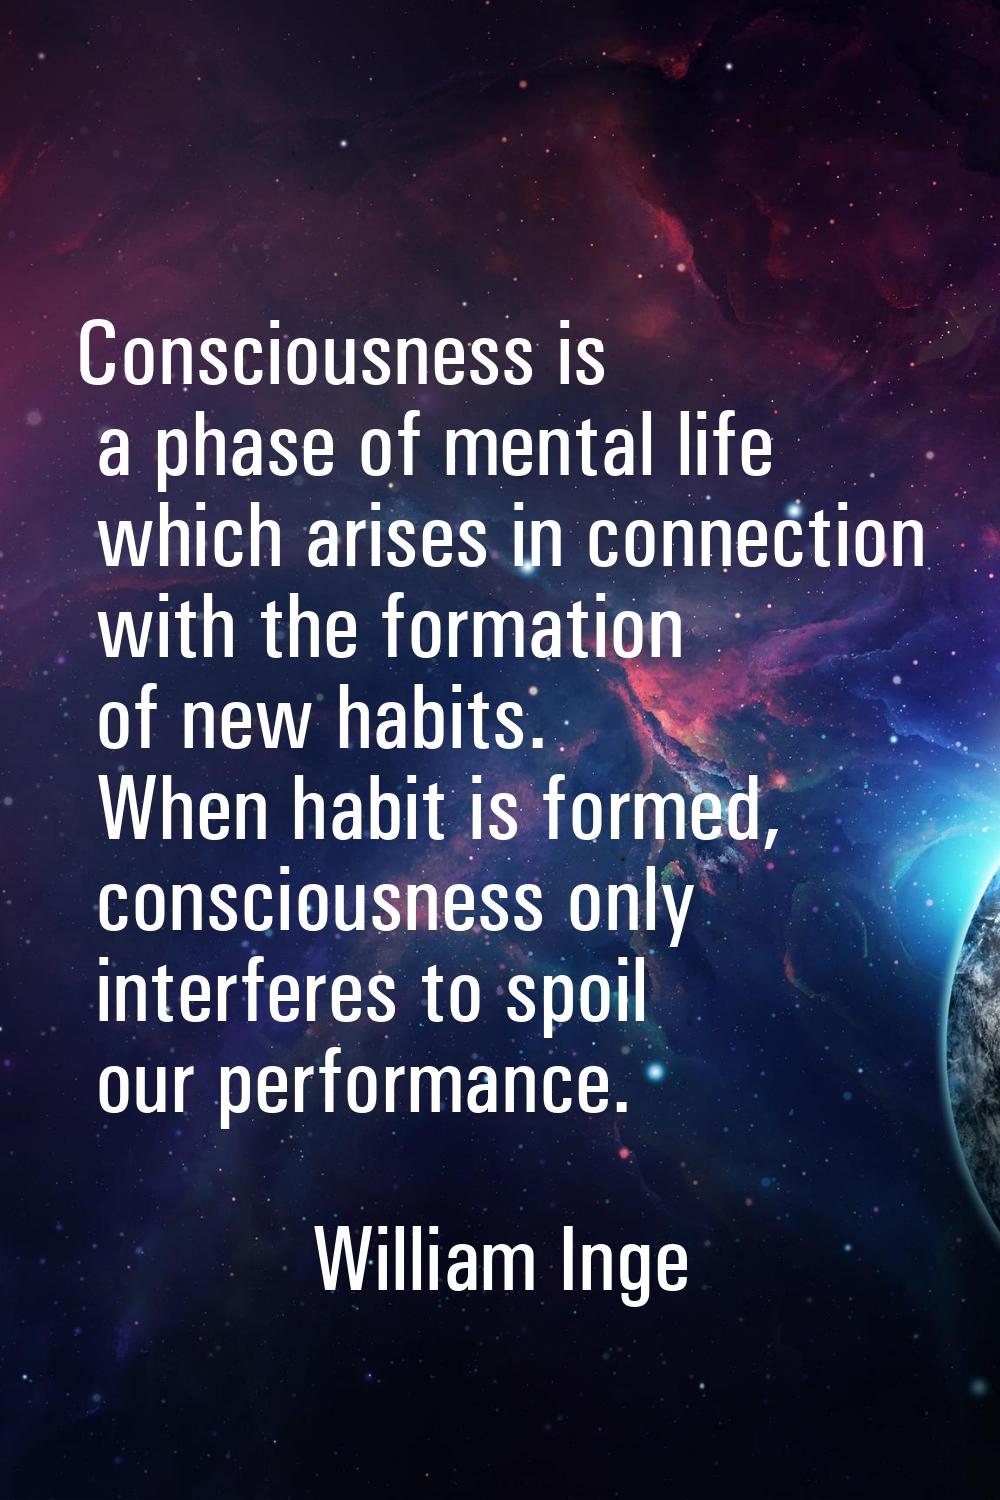 Consciousness is a phase of mental life which arises in connection with the formation of new habits